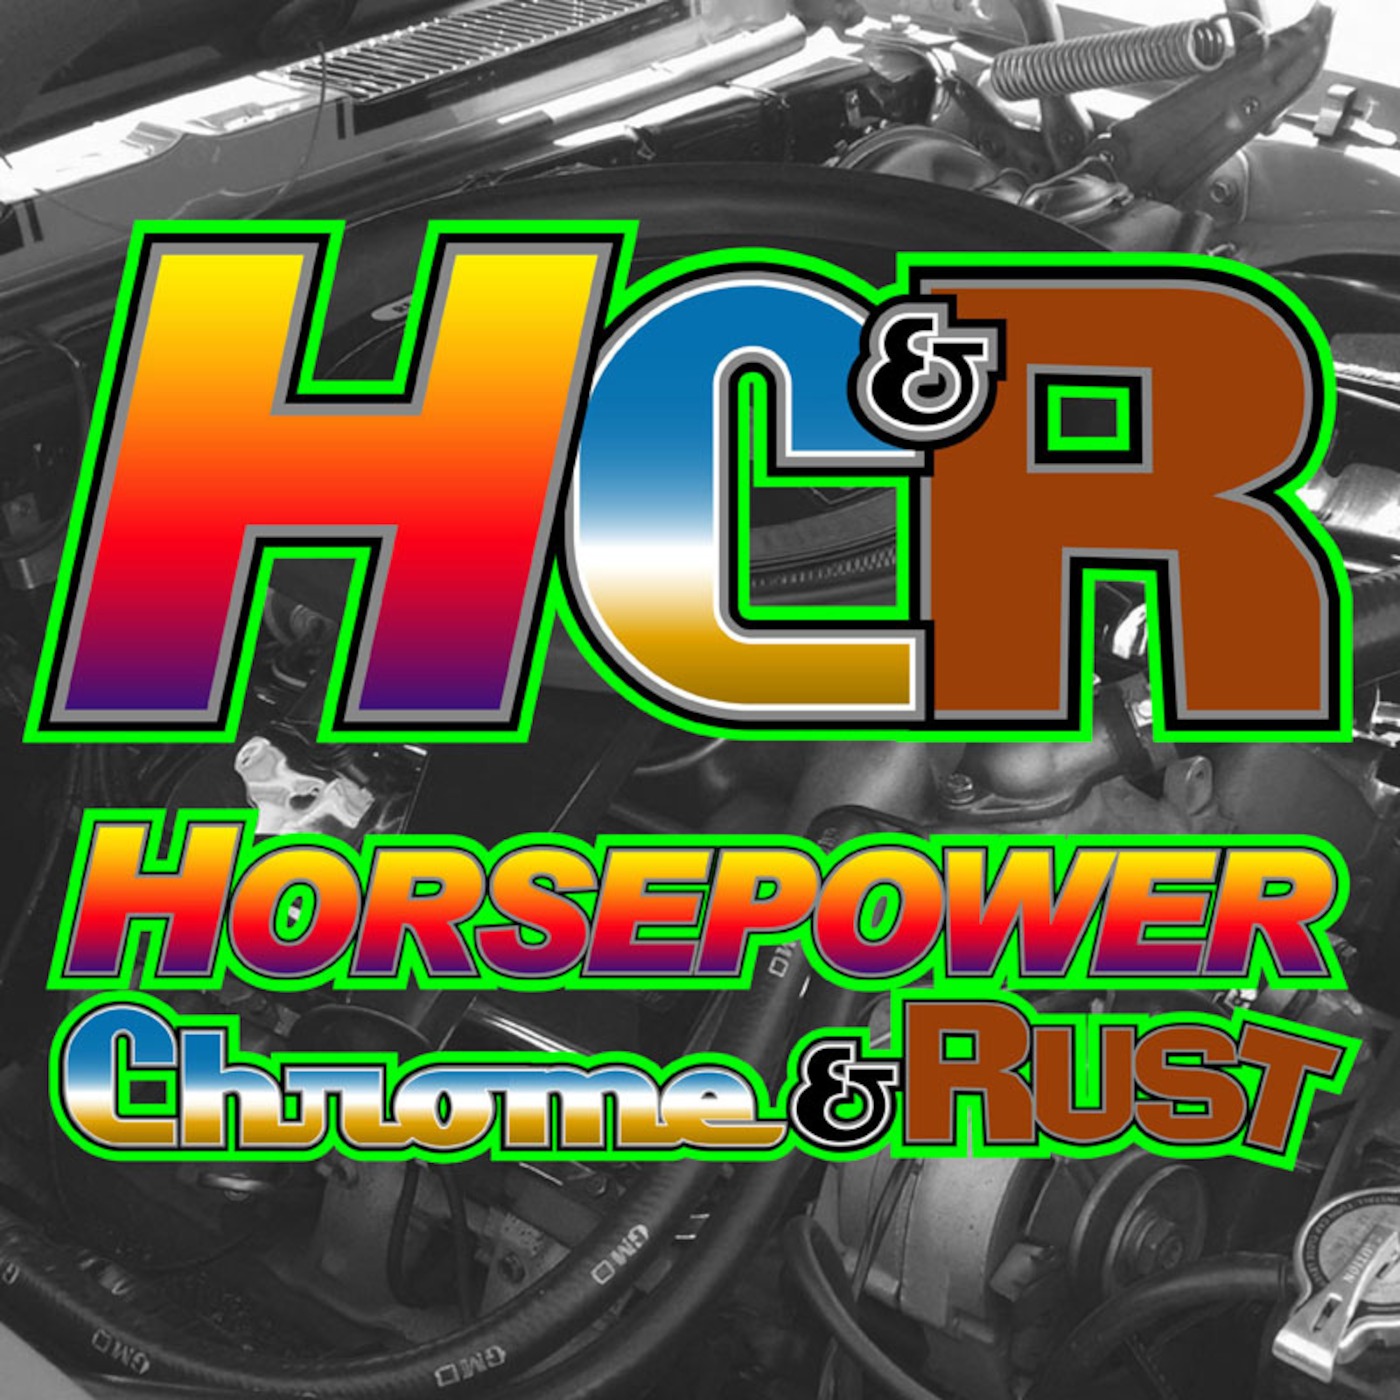 Horsepower Chrome and Rust EP87 Steve Tate Rats for Autism Interview & More May 28 2019